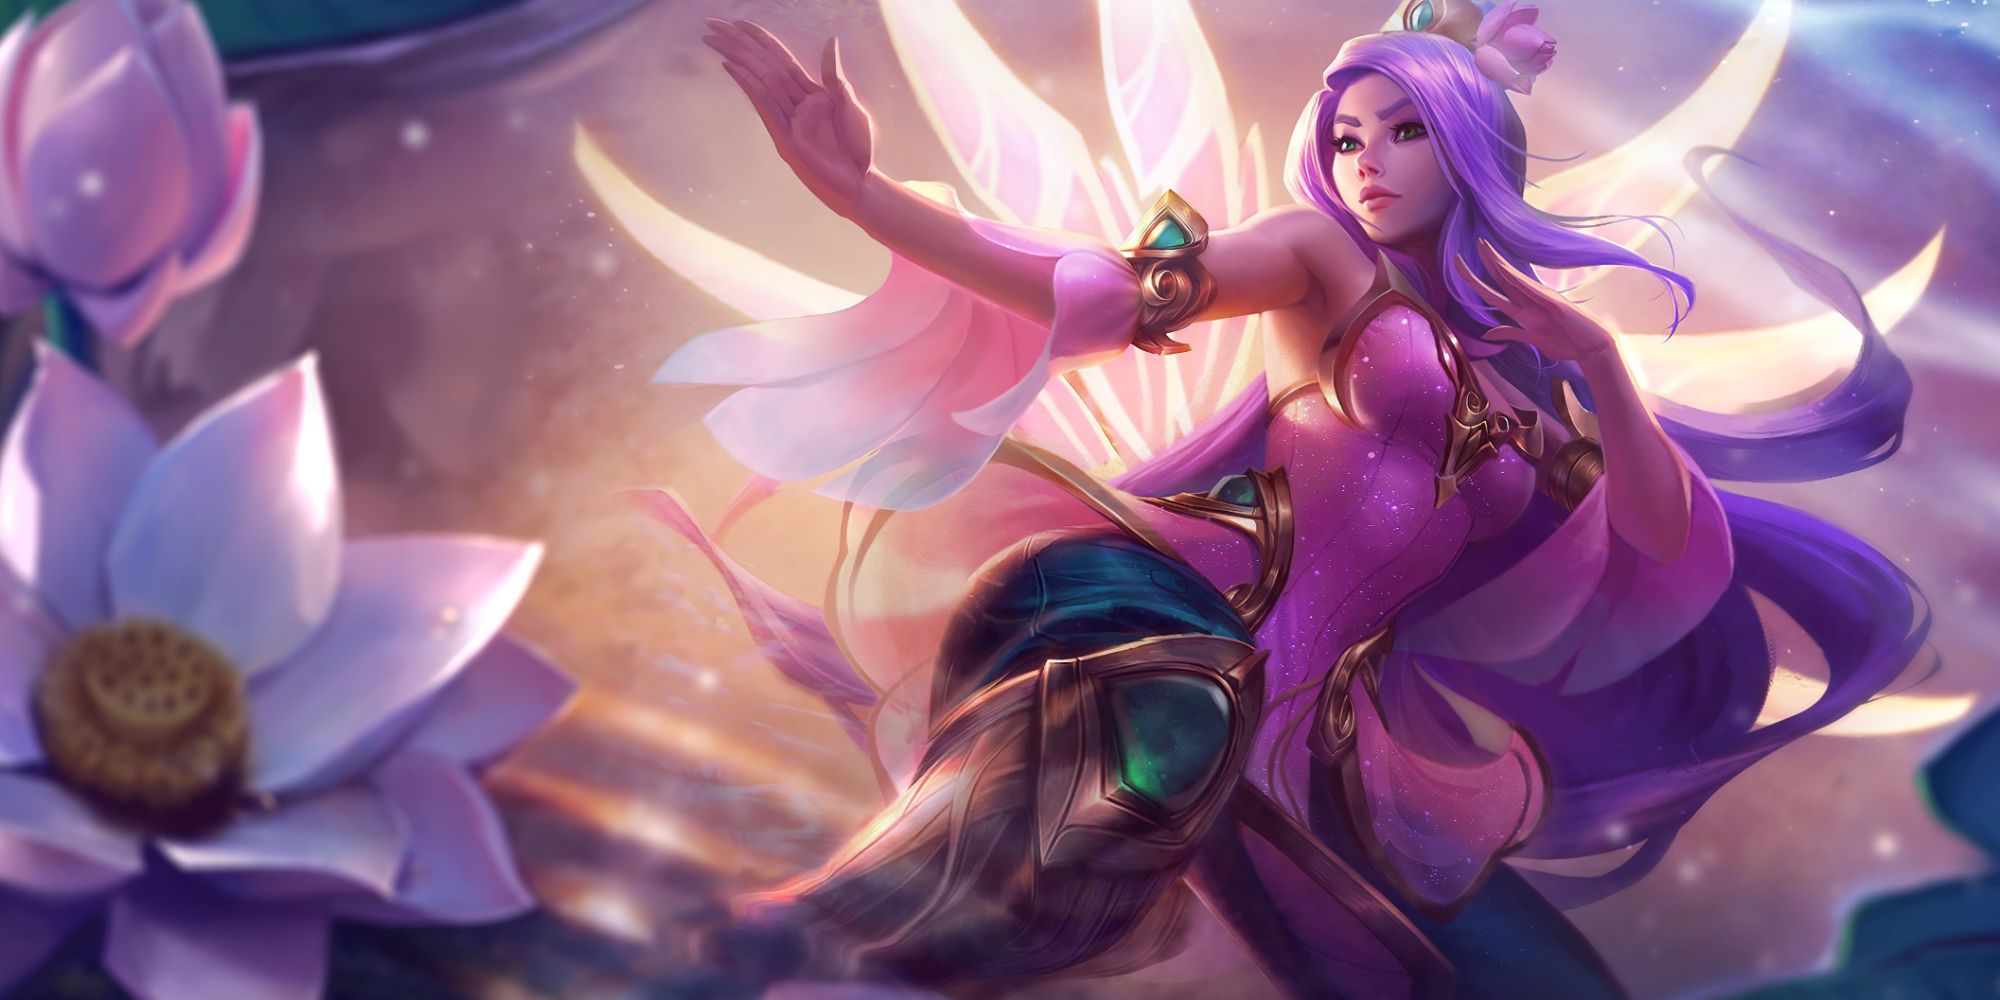 Order of the Lotus Irelia  dancing with her blades over a beautiful pond full of lotus flowers as she gazes off